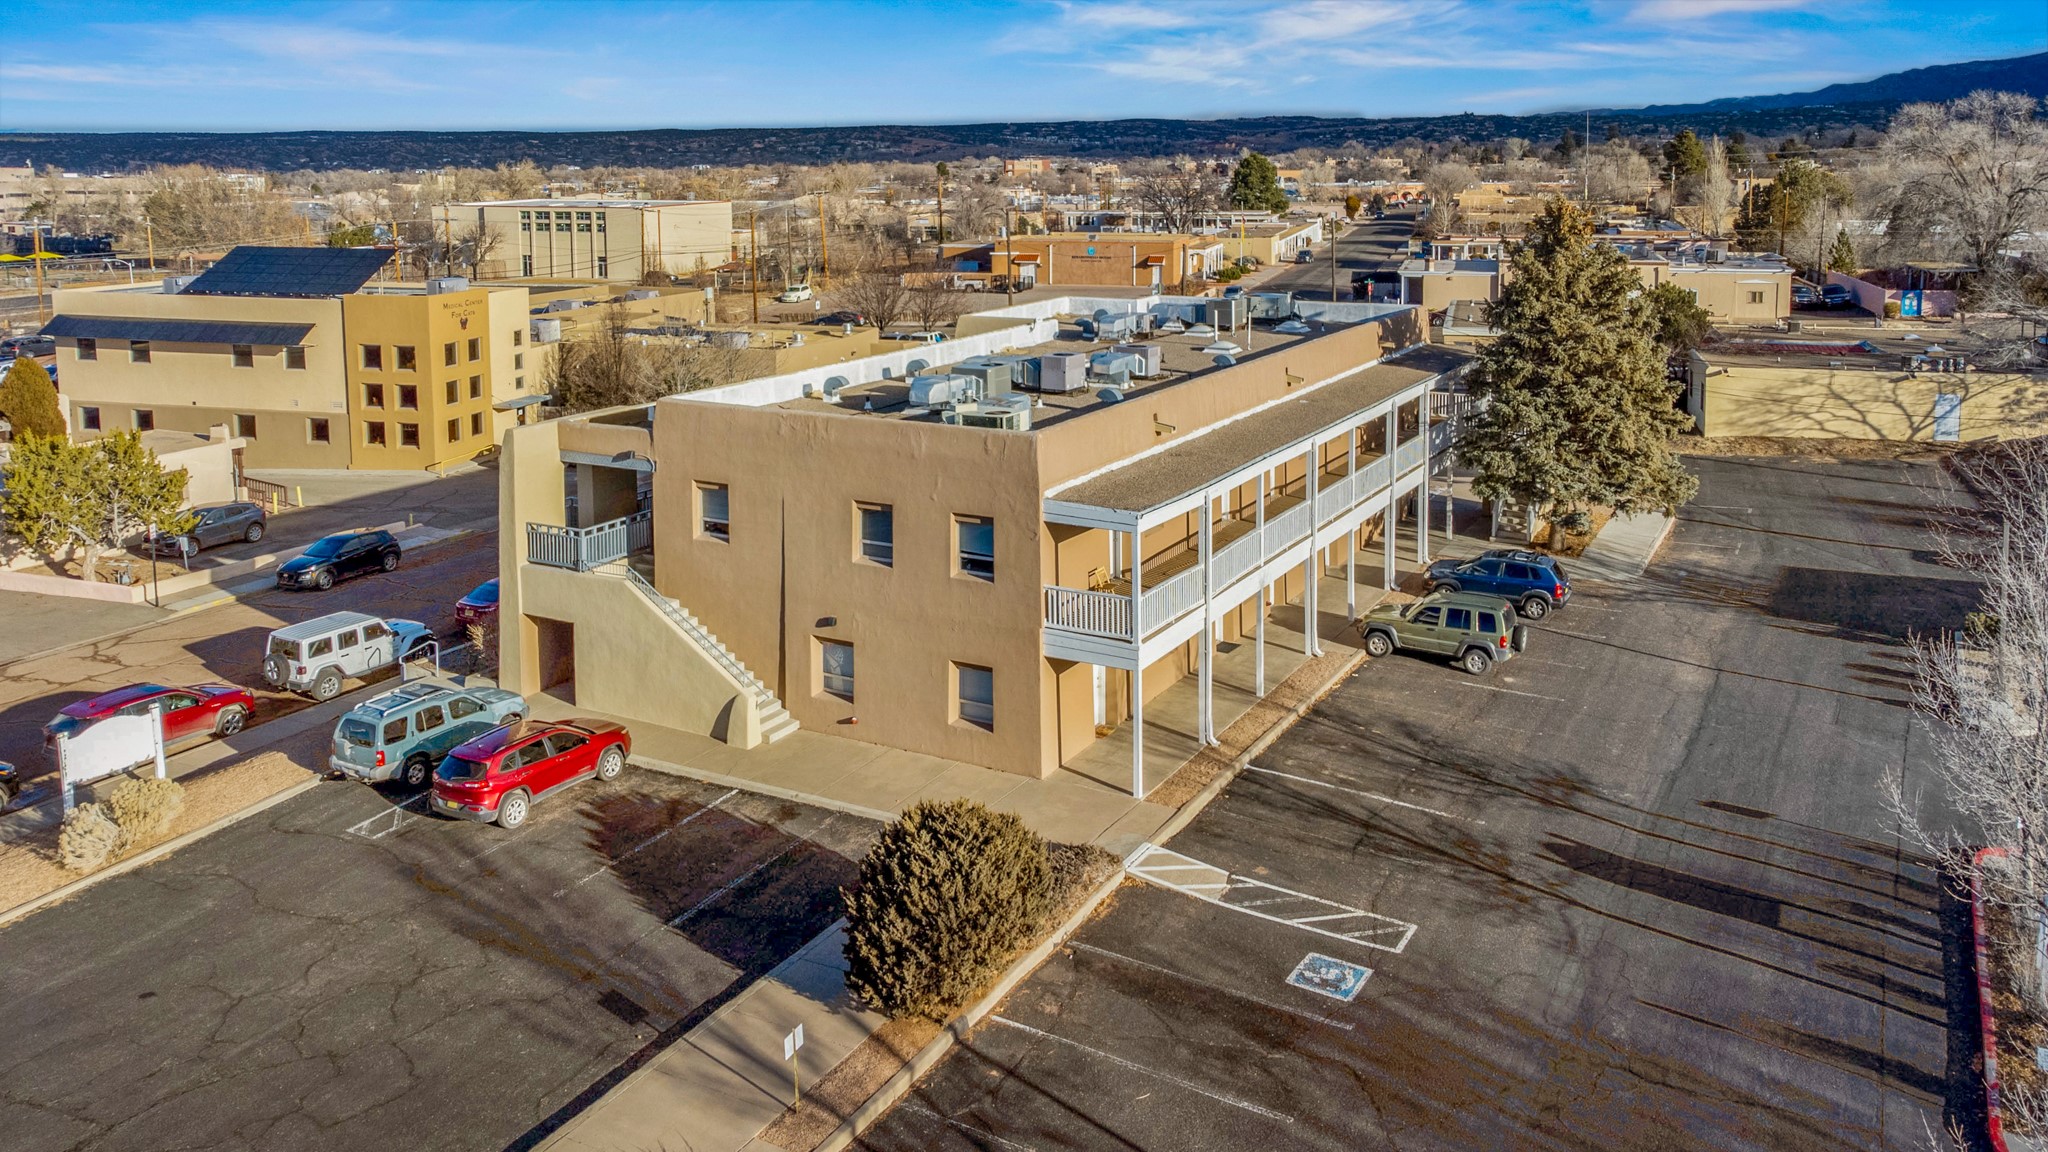 1405 Luisa Street 3, Santa Fe, New Mexico 87505, ,Commercial Lease,For Rent,1405 Luisa Street 3,202338892